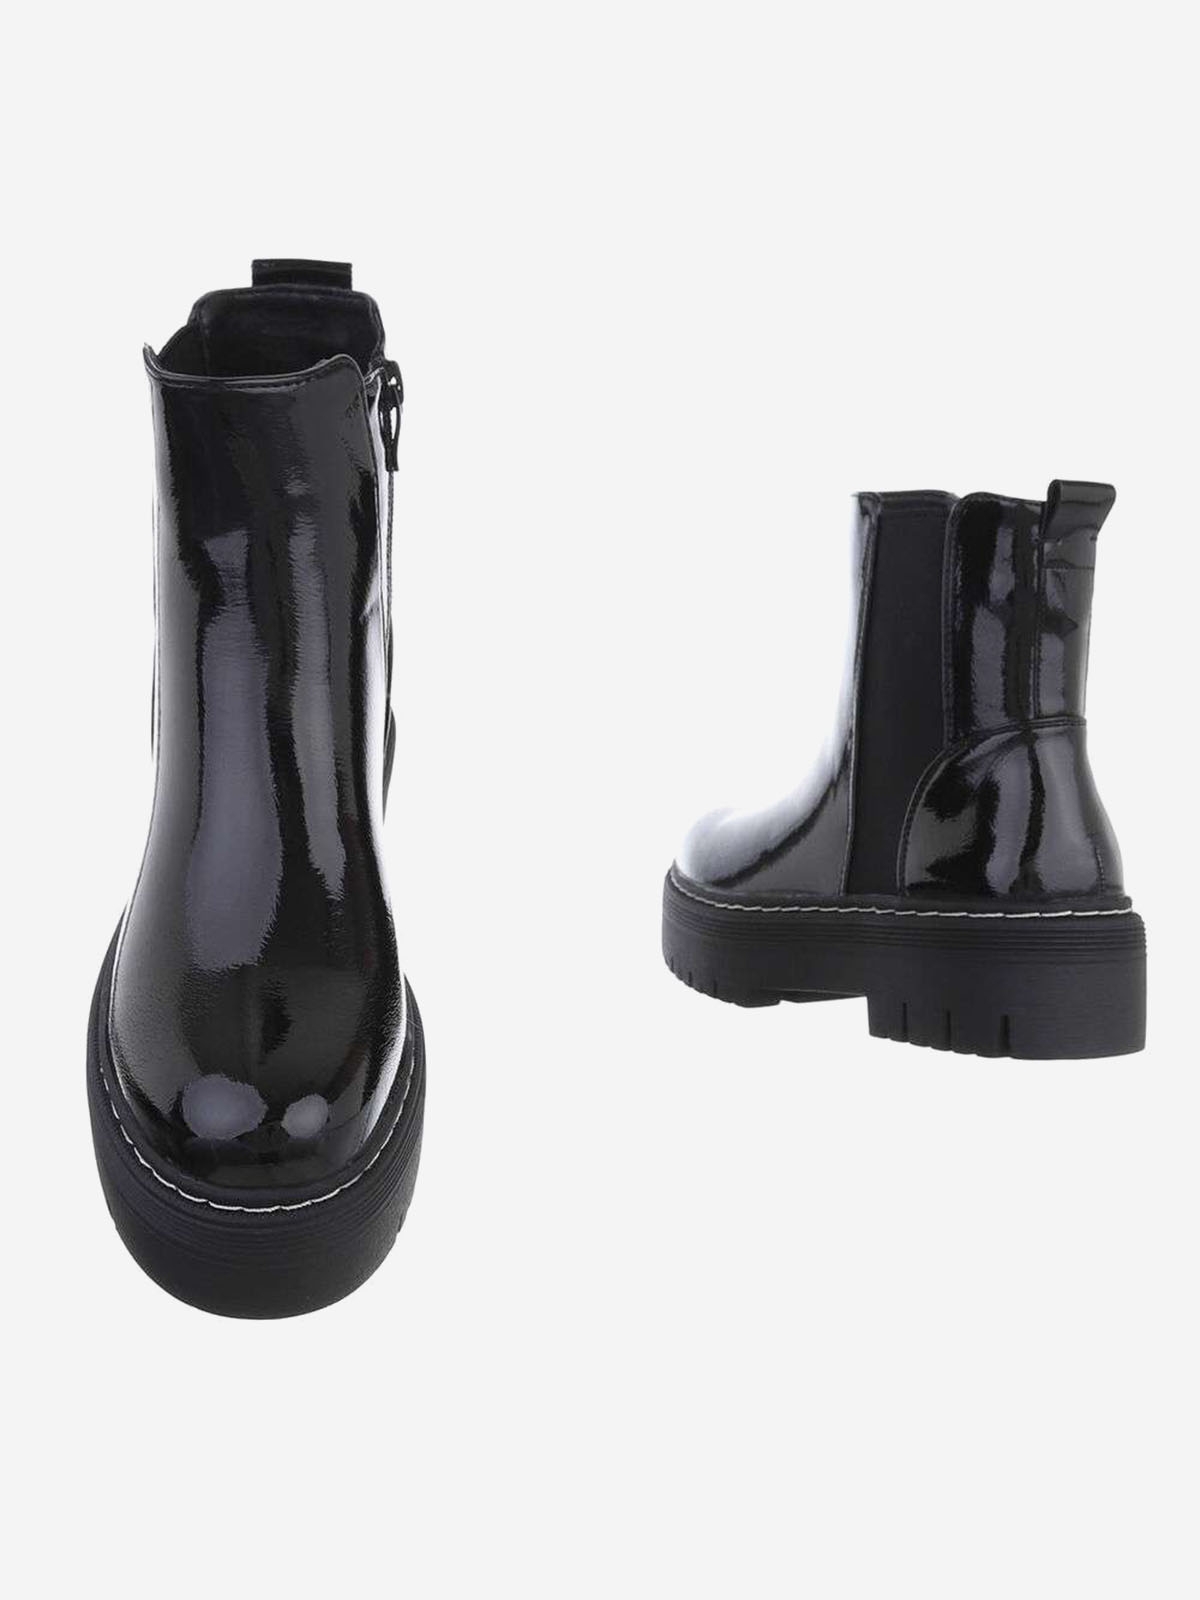 Chelsea style laquered women's ankle boots in black